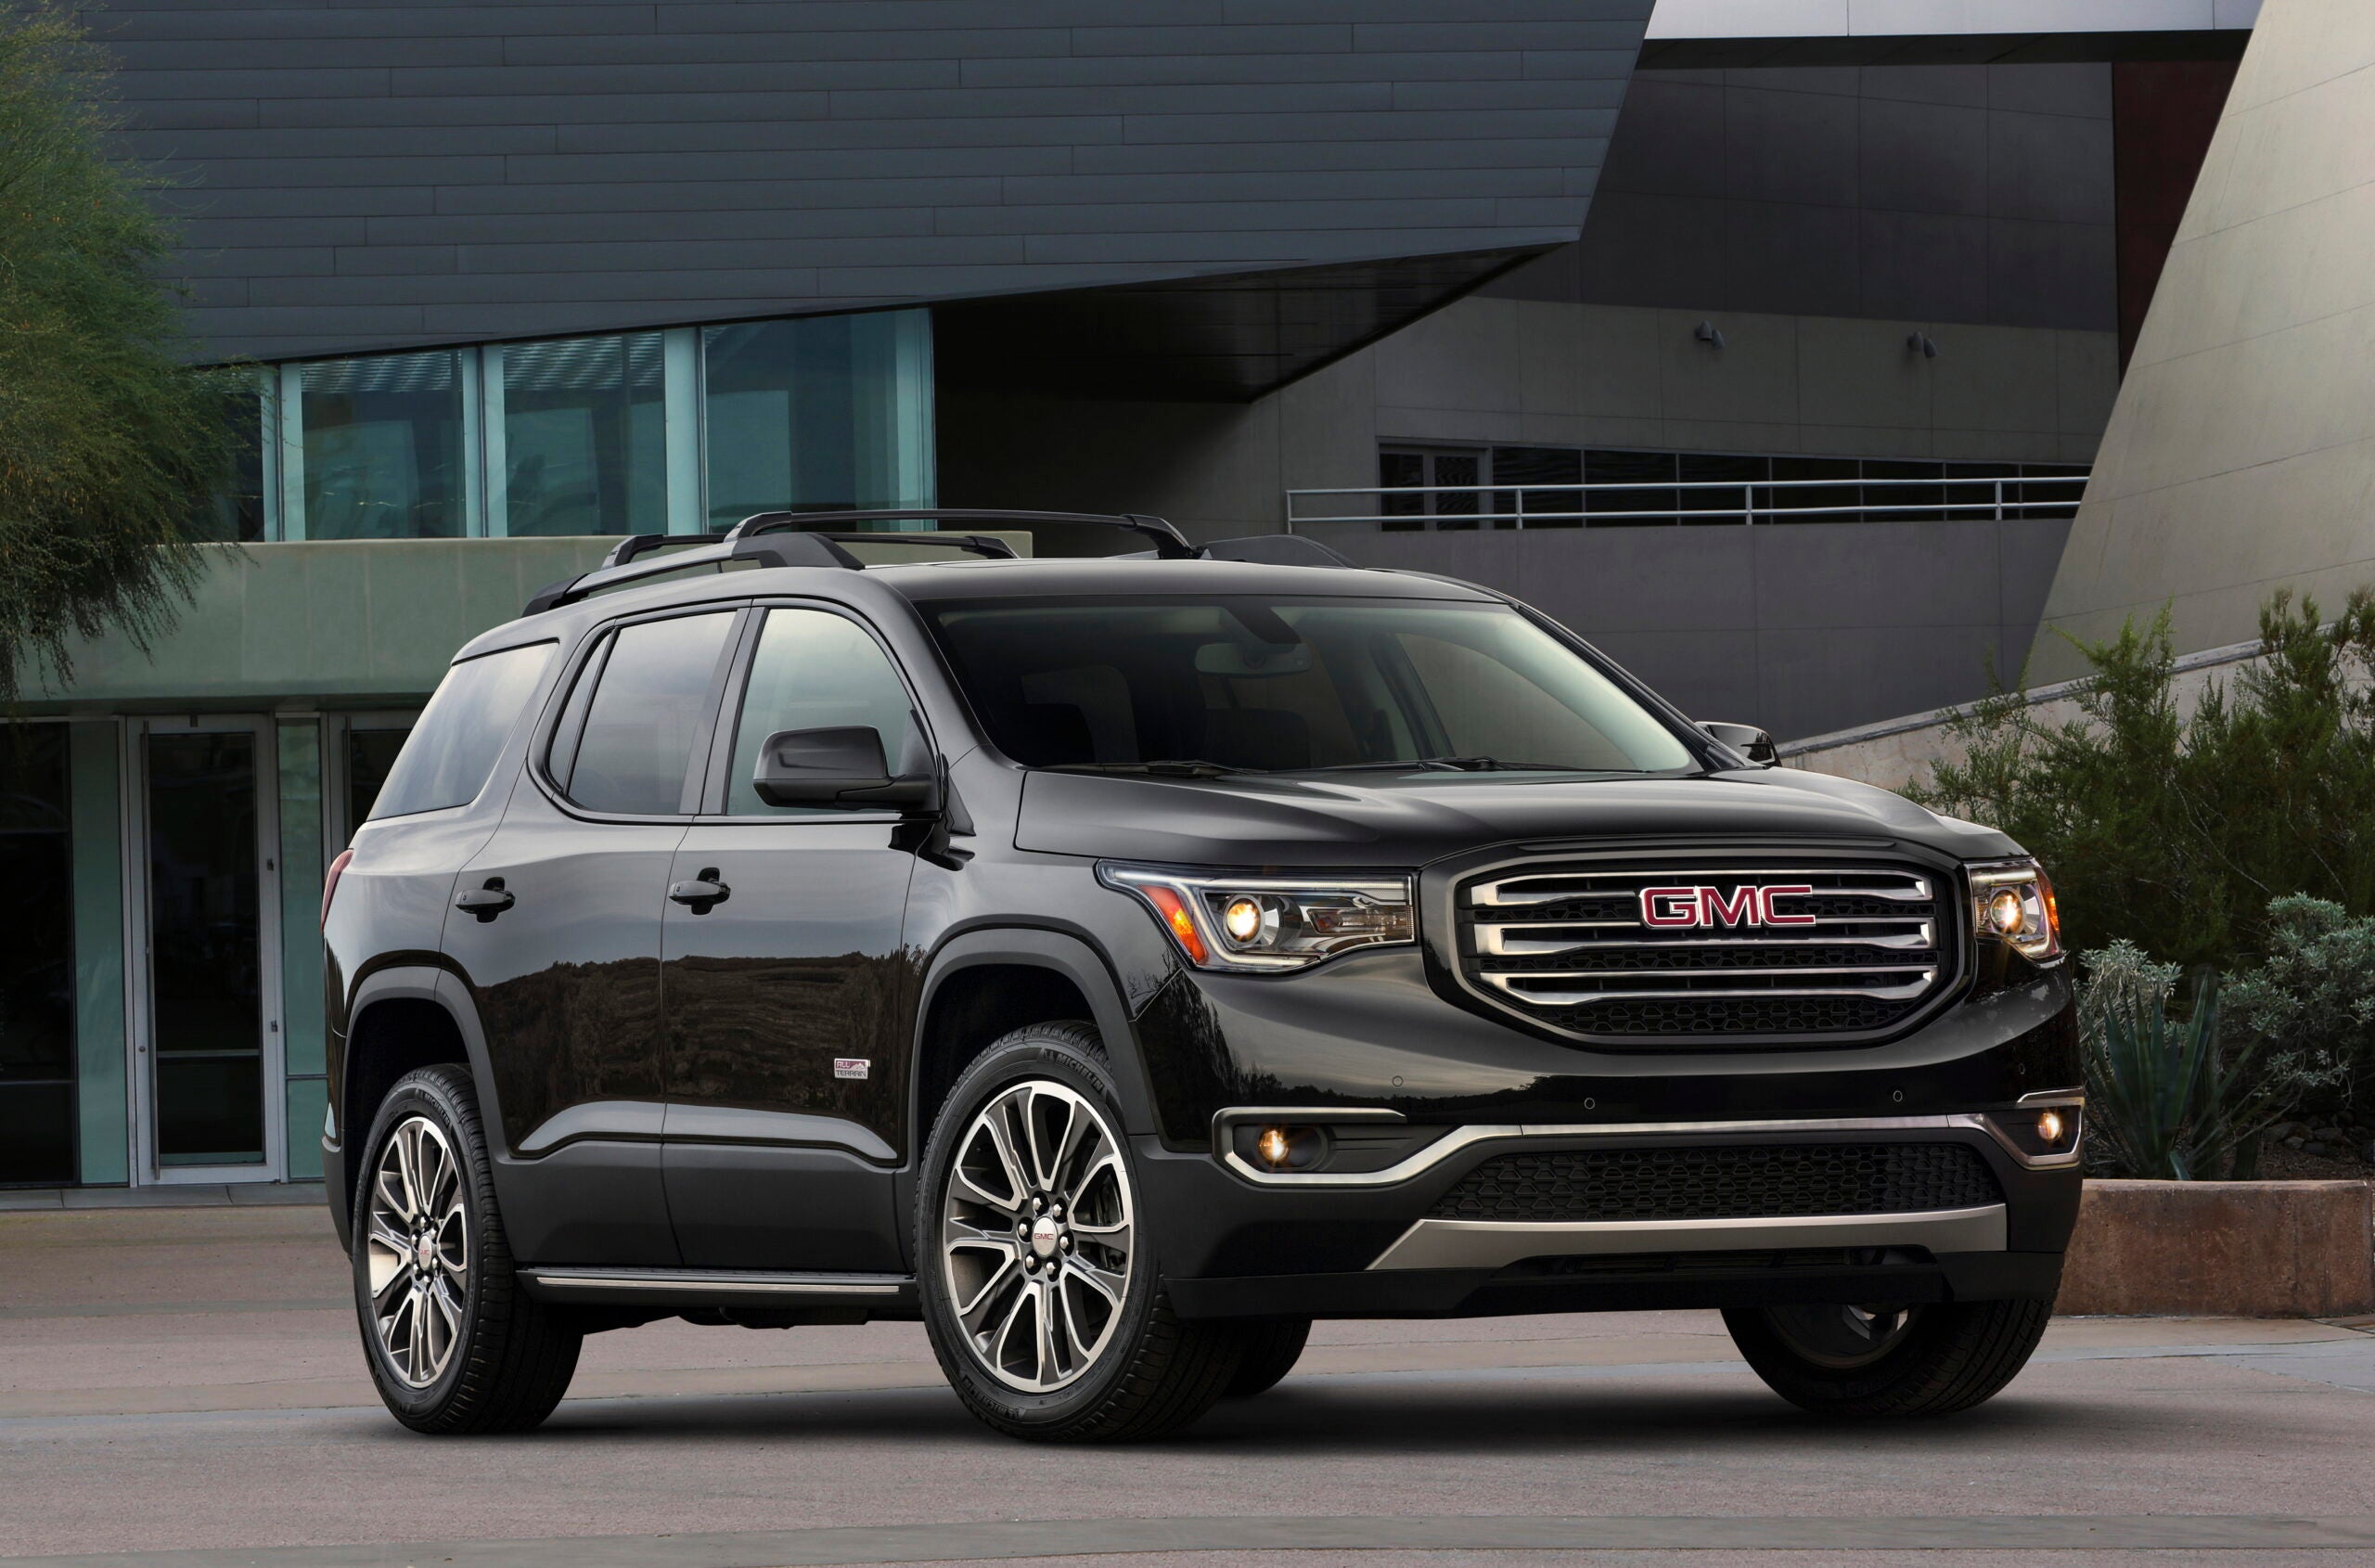 What the experts say about the 2018 GMC Acadia